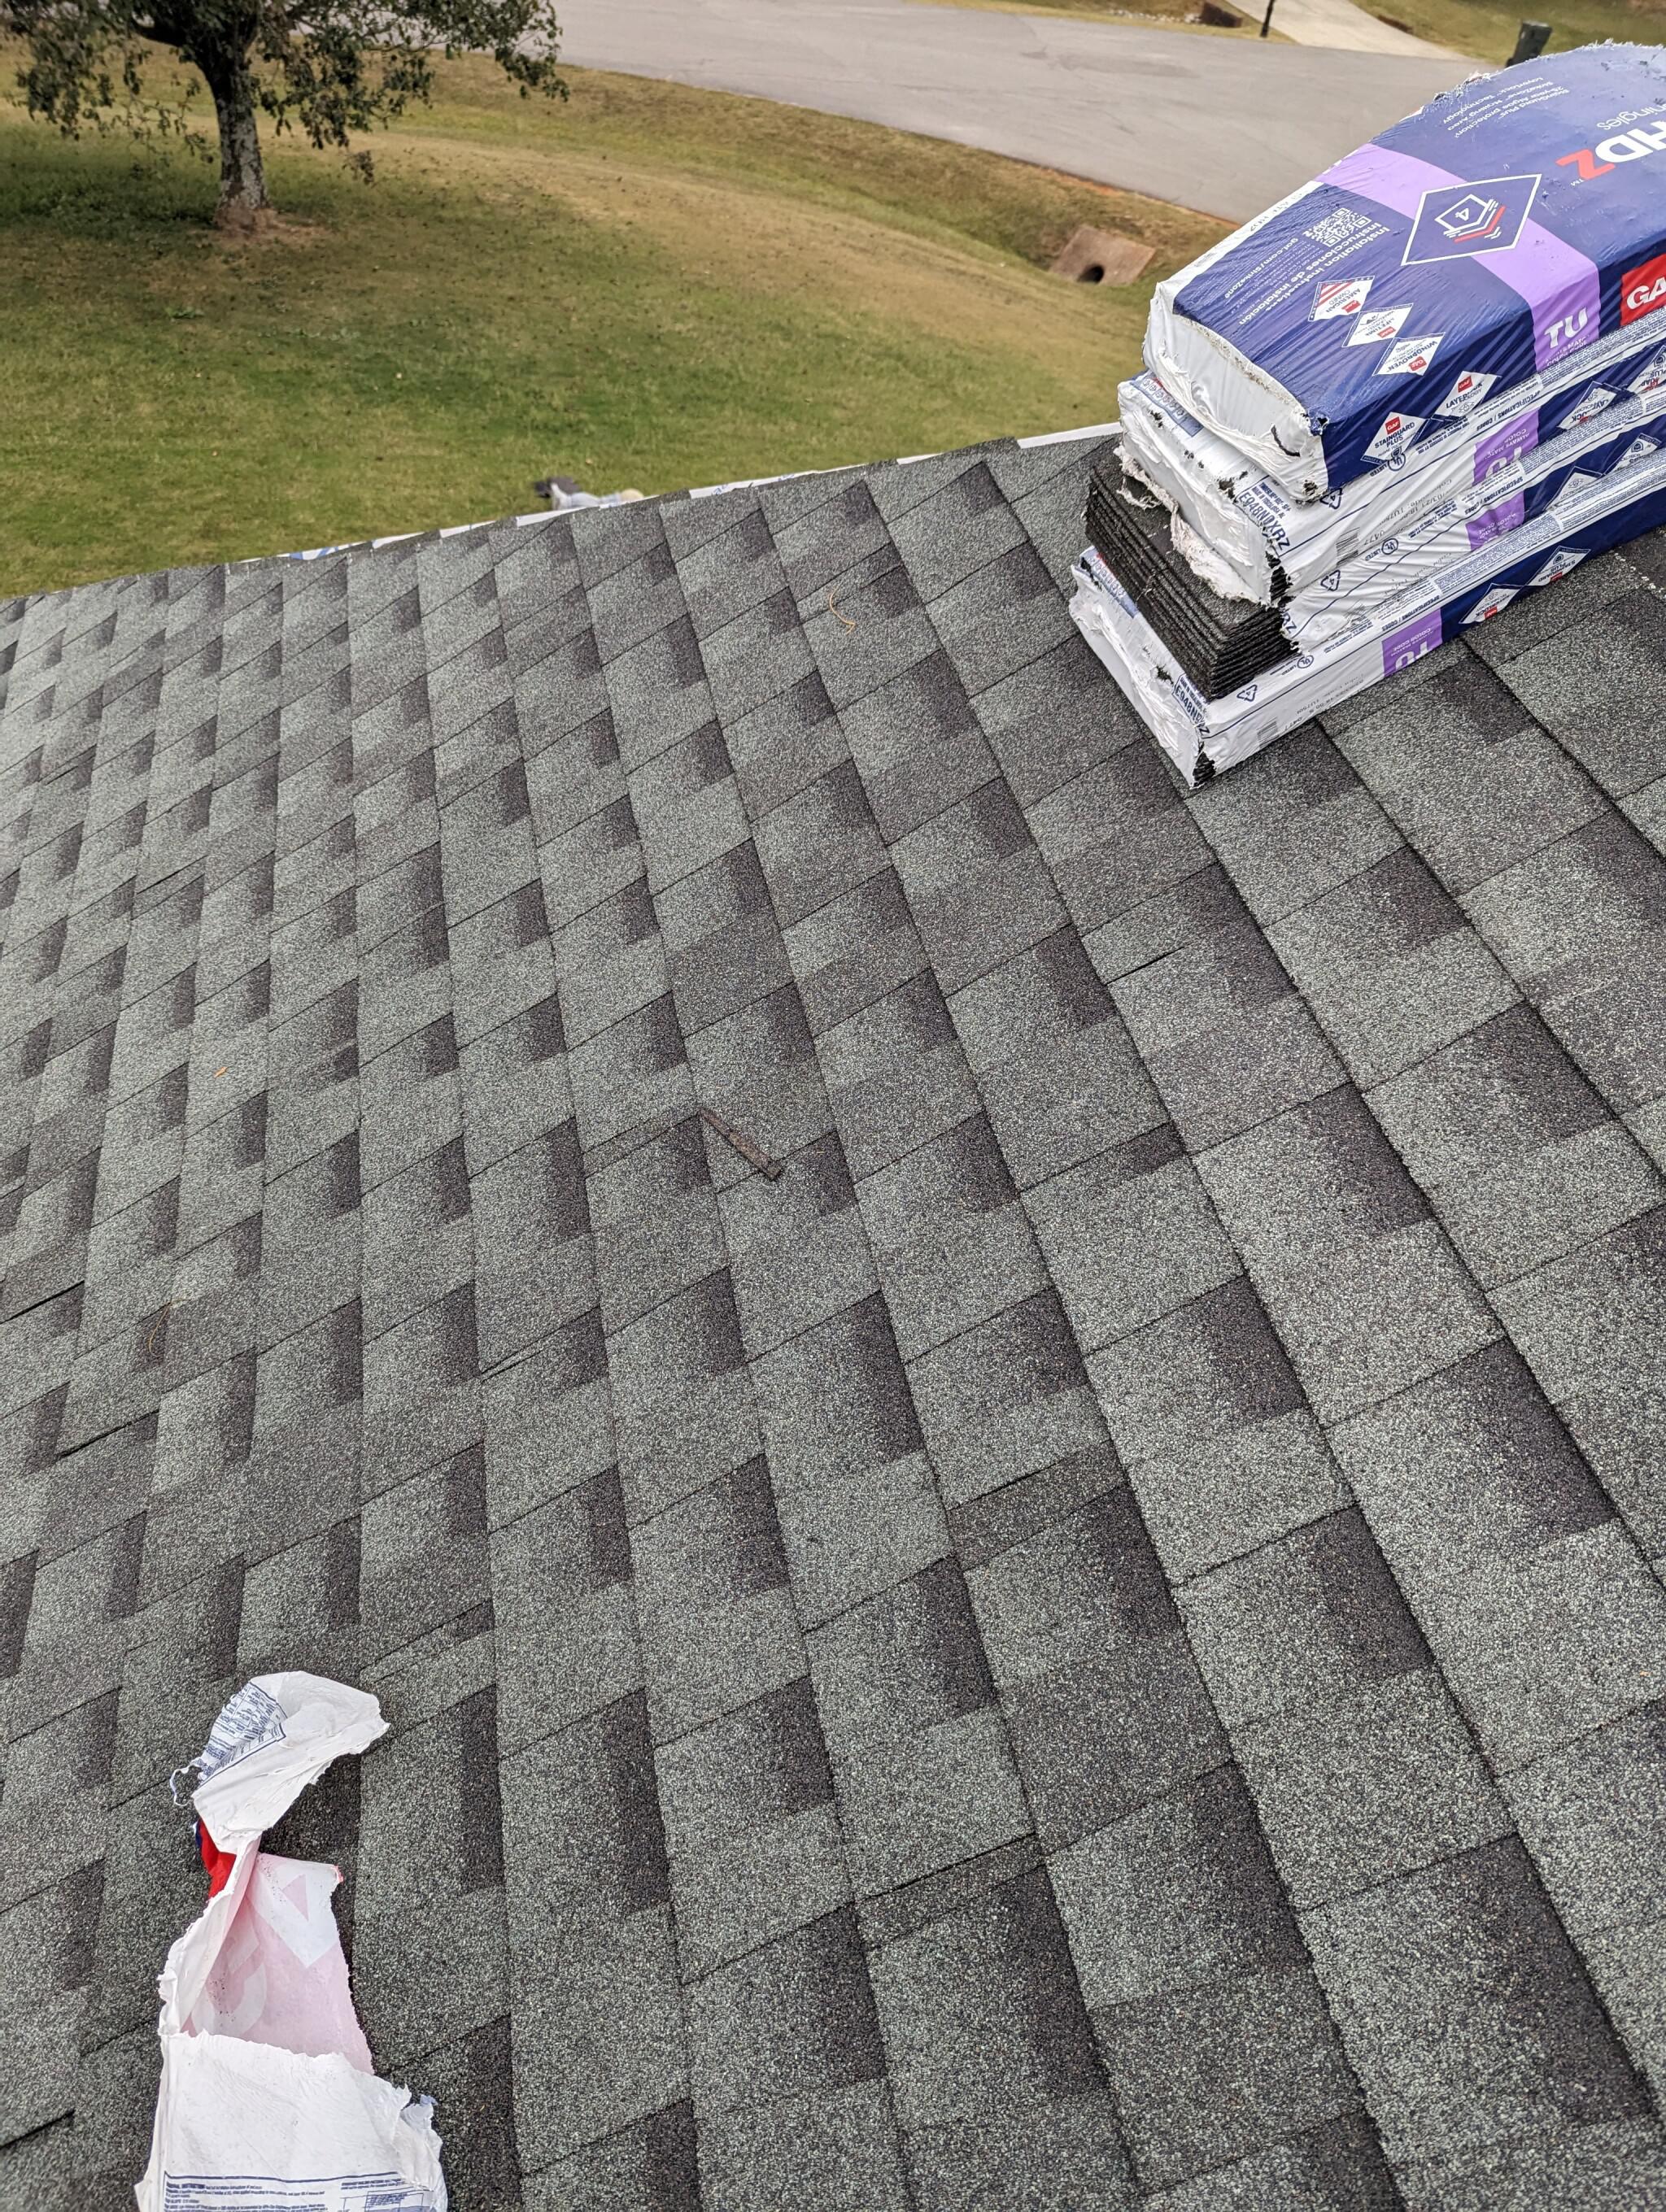 Complete Roofing Madison (256)542-1448